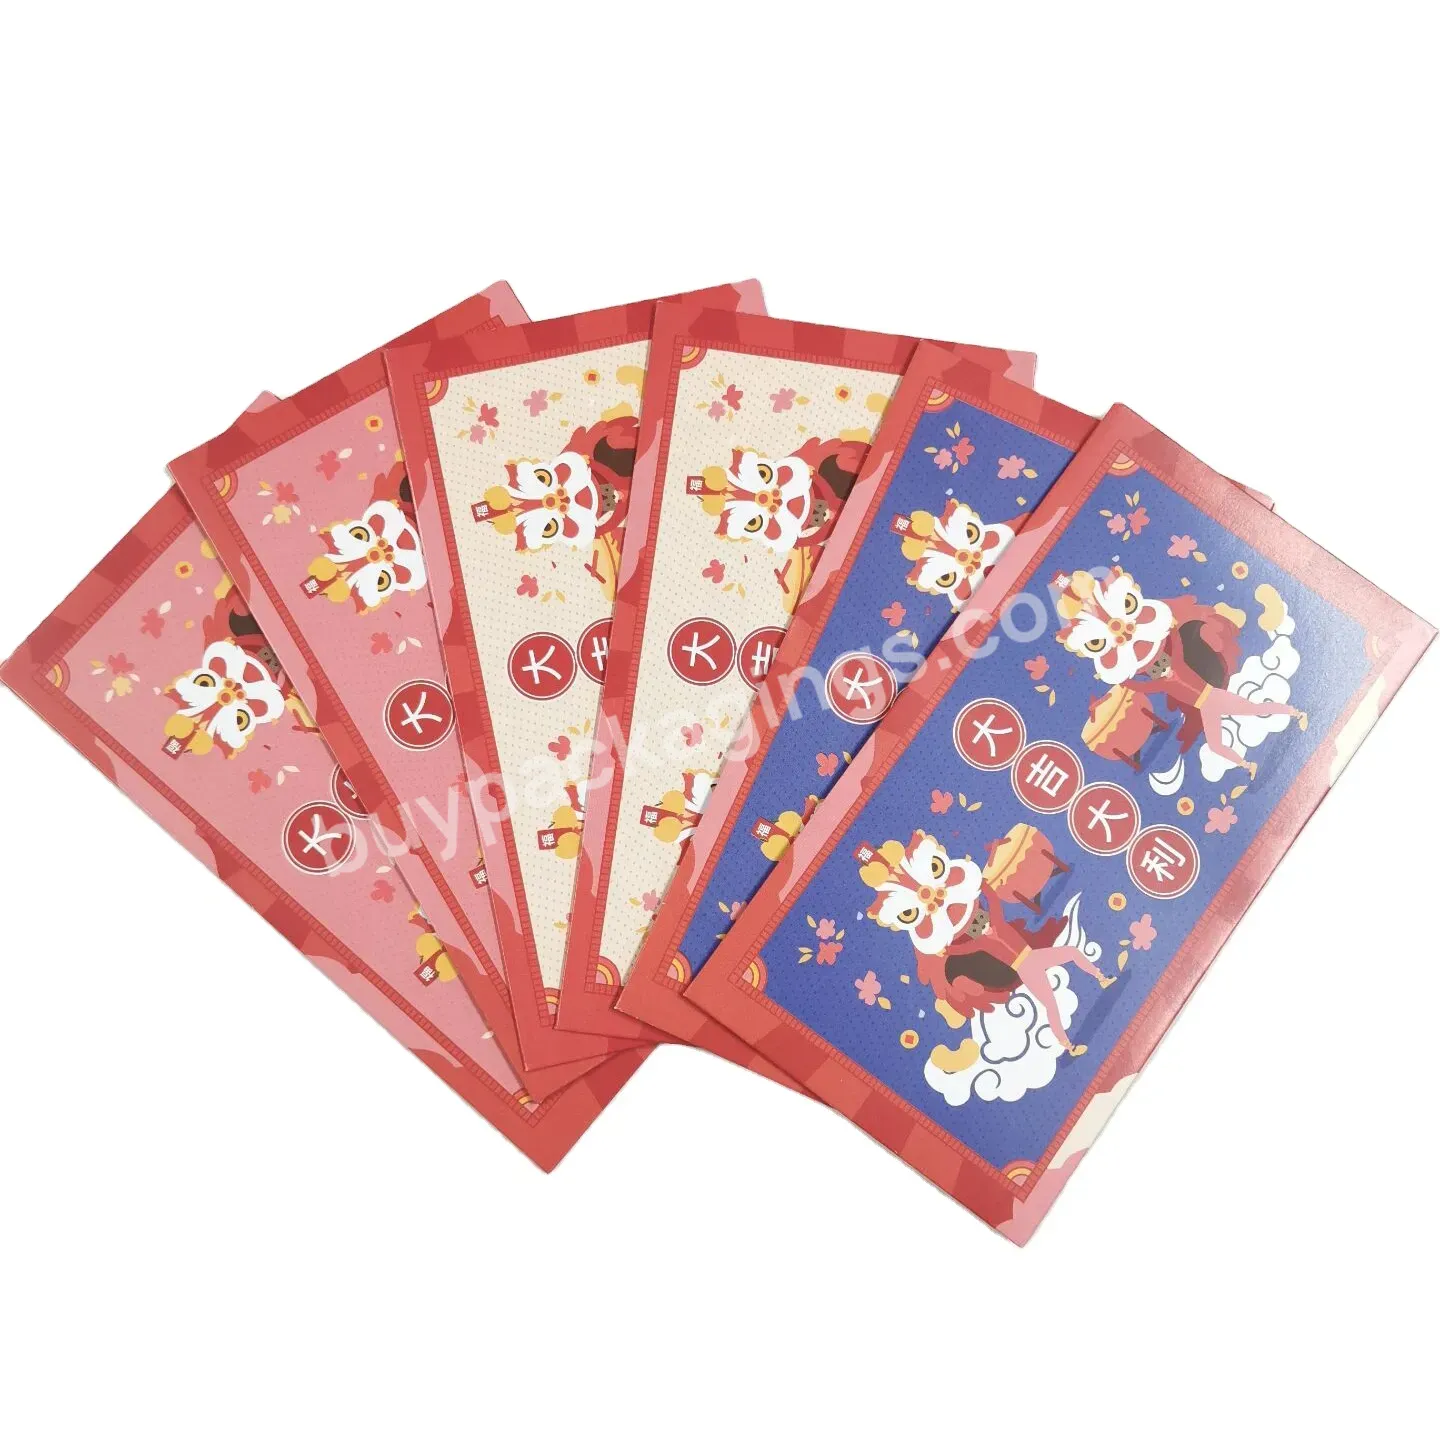 Custom High End Red Envelope With Gold Foil Pattern For Chinese New Year